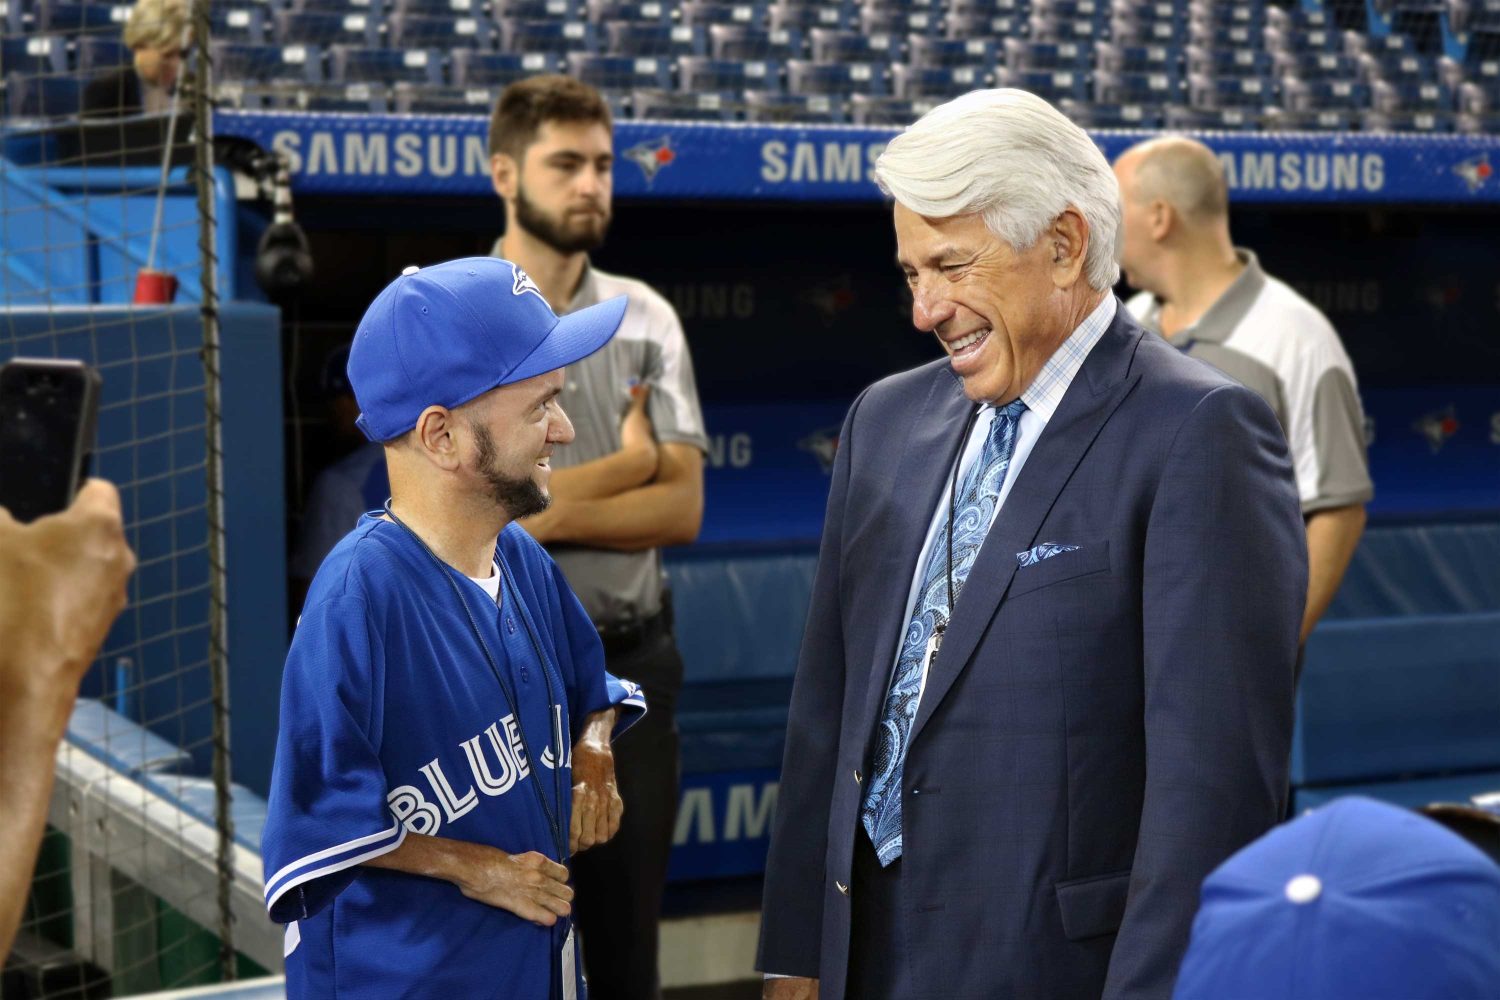 Blue Jays broadcaster Buck Martinez returns to booth after completing  cancer treatment